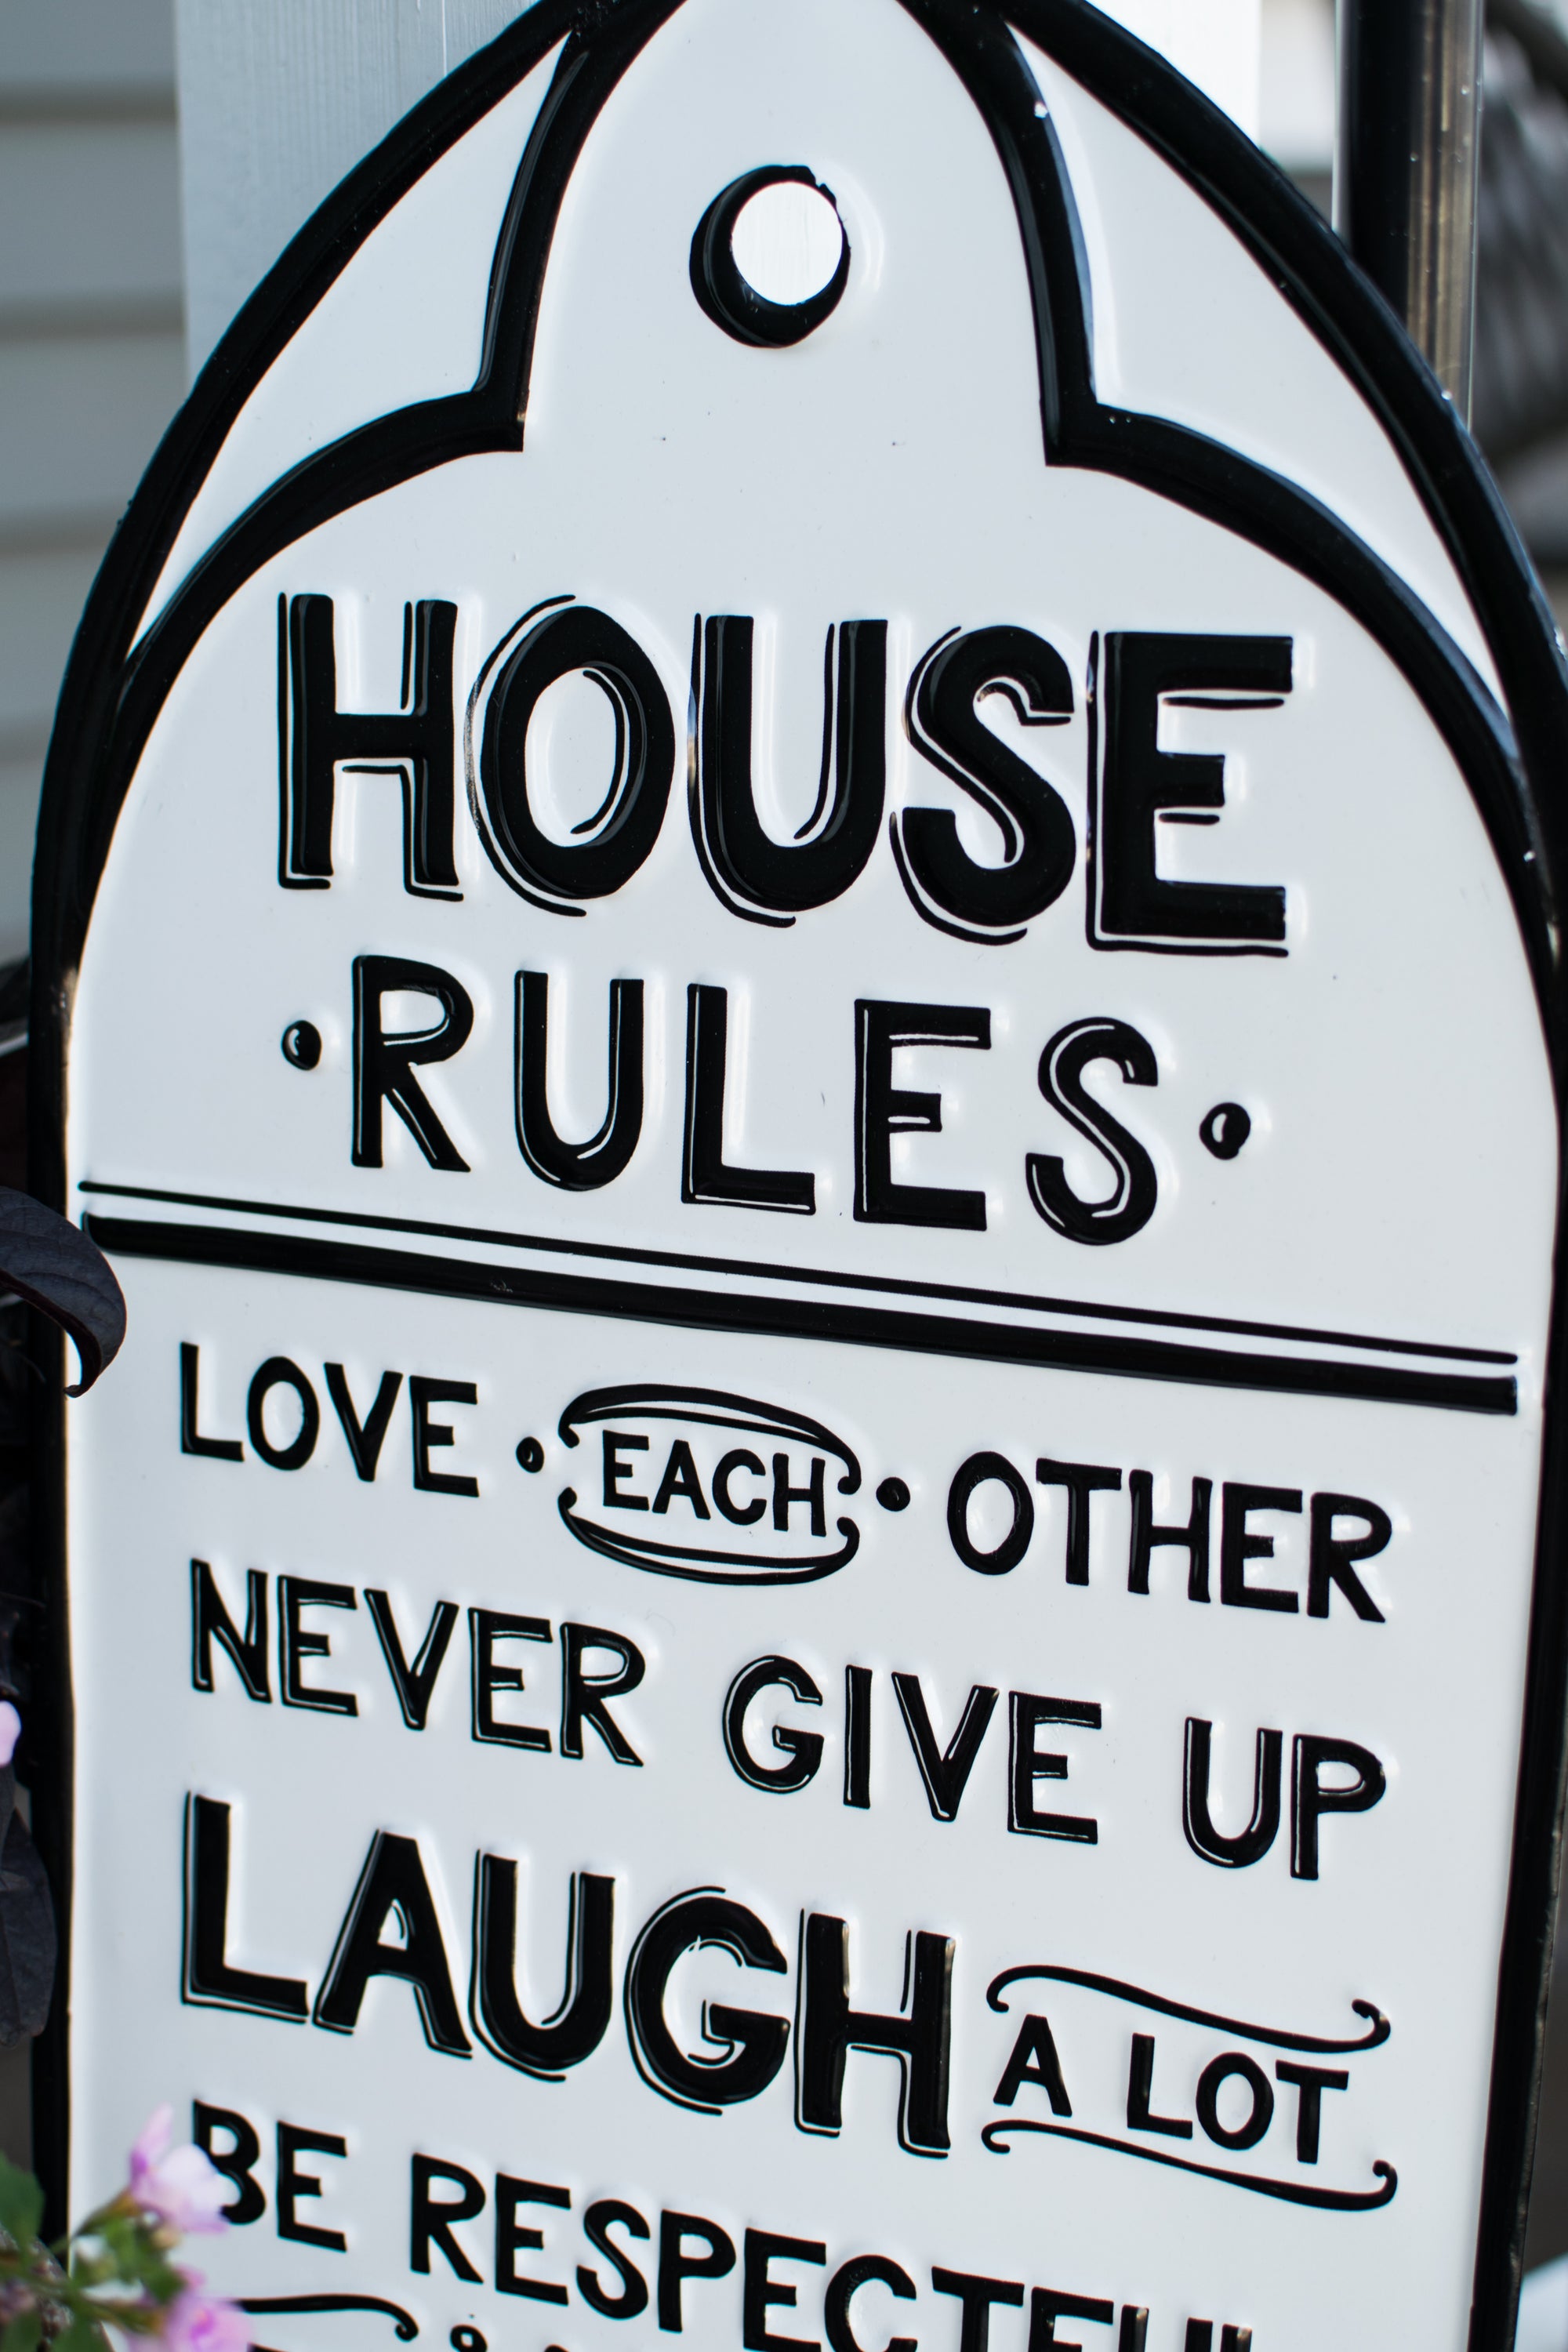 House Rules Tin Wall Plaque